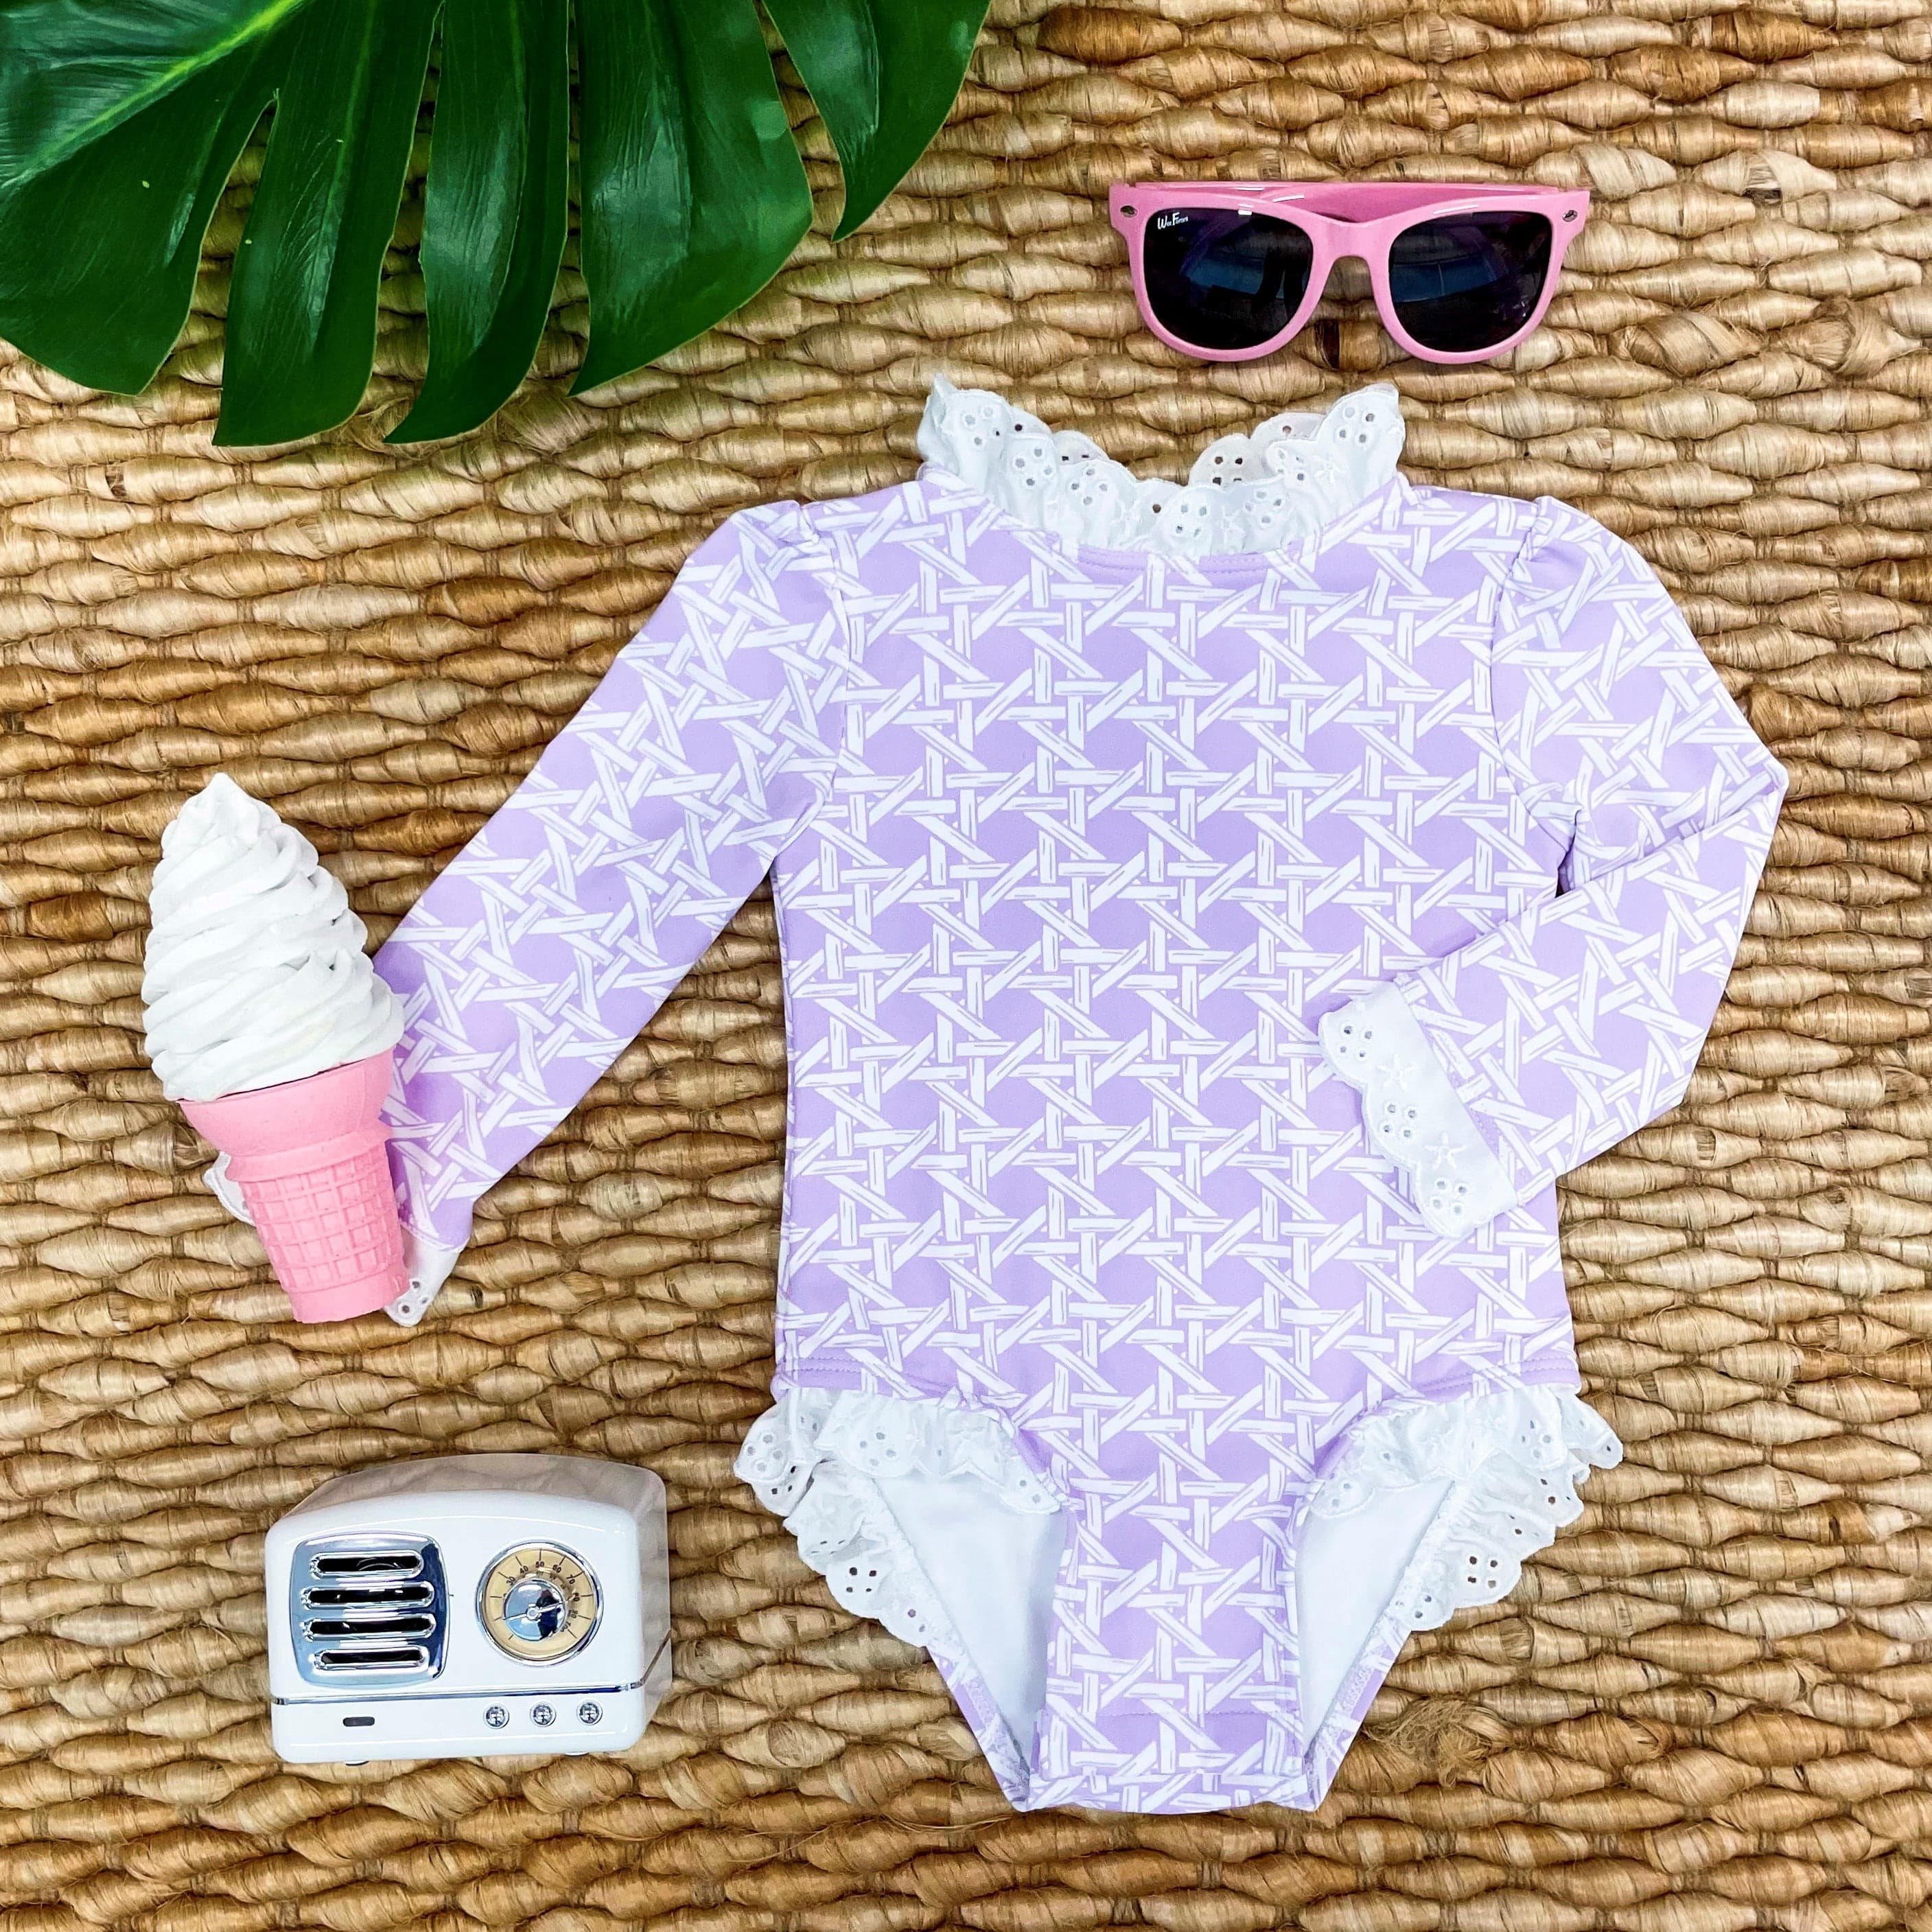 Beaufort Bonnet Company Beaufort Bonnet Company Sarasota Surf-Suit Ocean Club Cane with Worth Avenue White Eyelet - Little Miss Muffin Children & Home